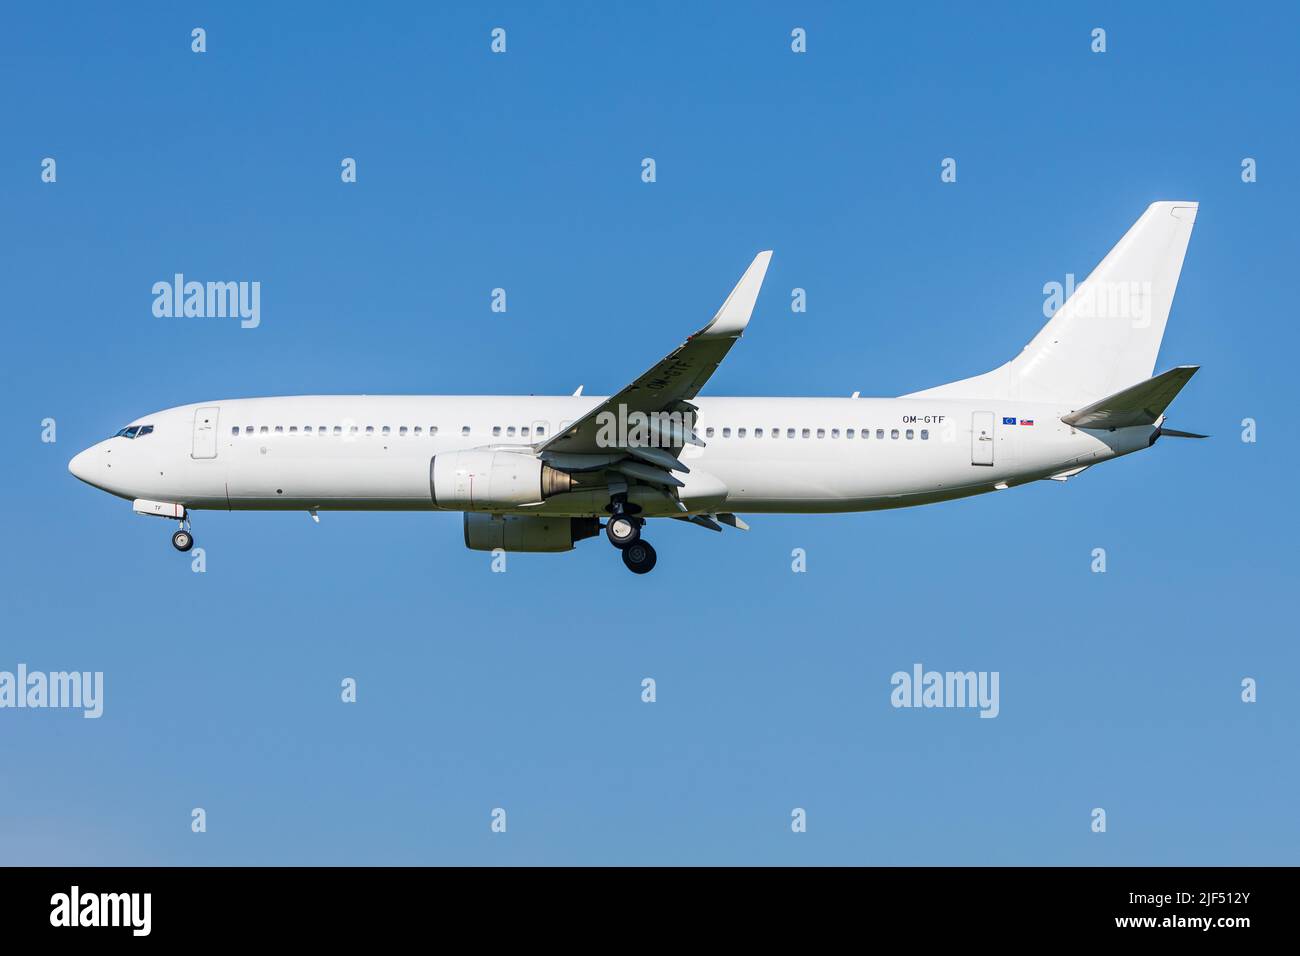 Full white neutralized airliner Boeing 737-800 of slovakian Carrier Air Explore landing at an airport in front of clear blue sky Stock Photo